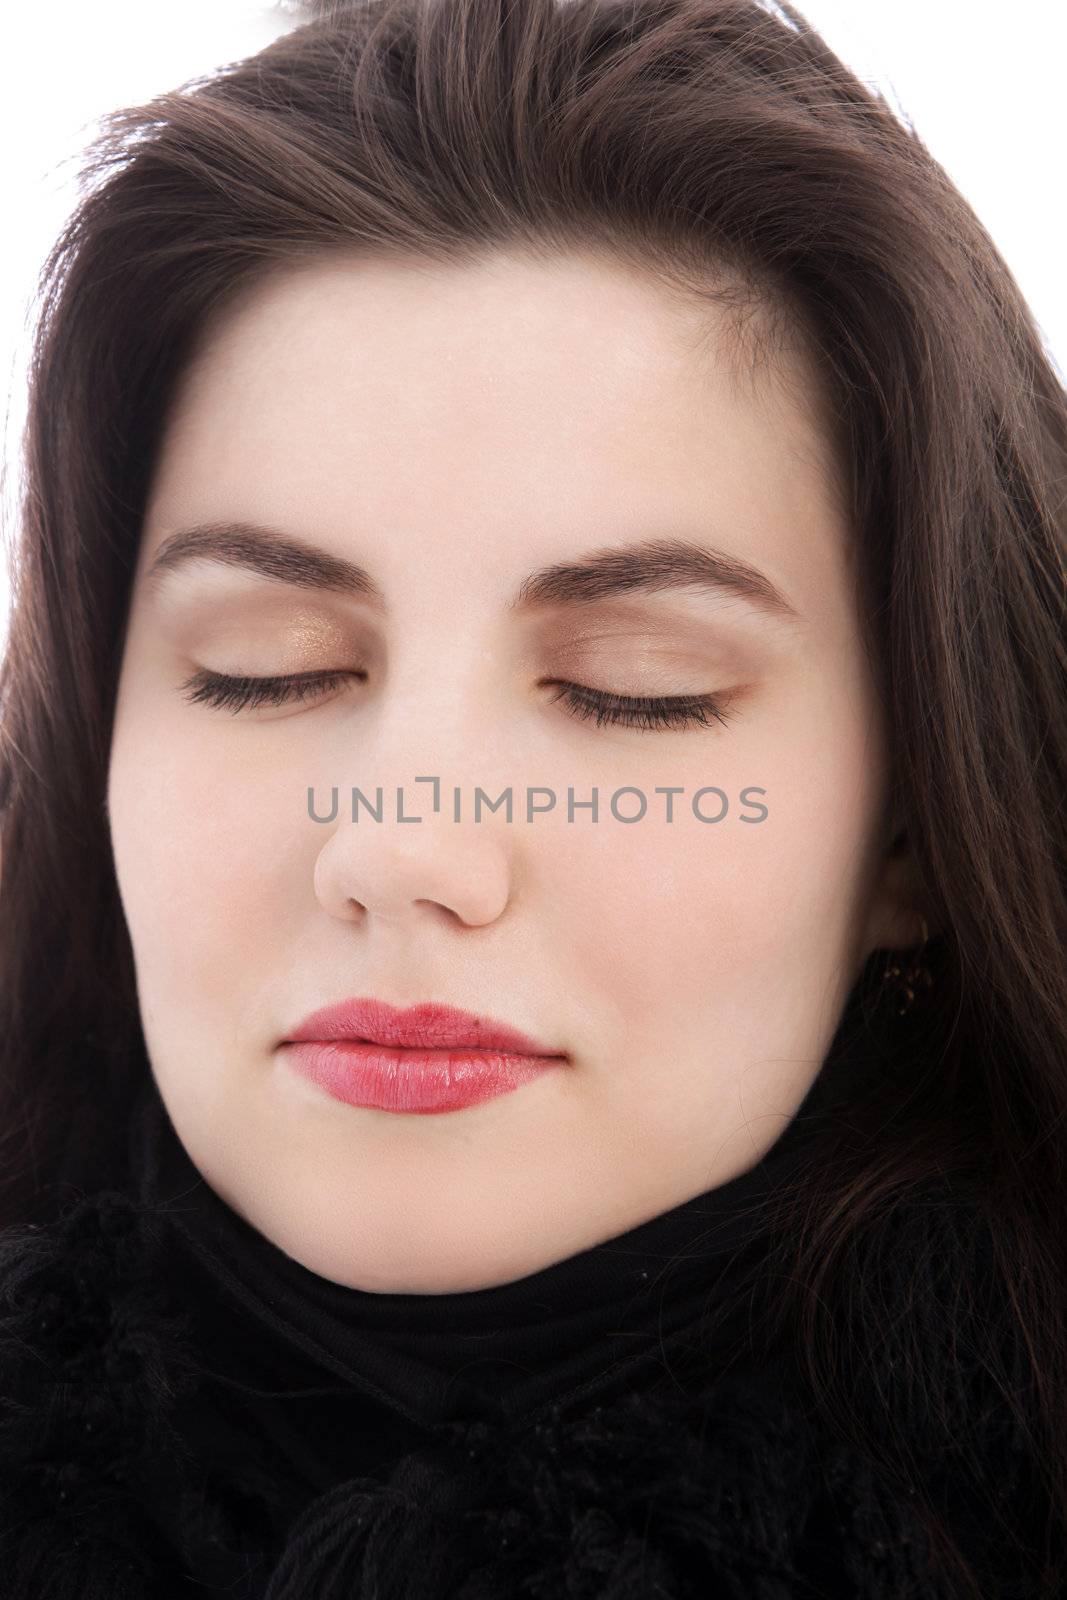 Relaxed brunette woman with eyes closed, close up by Farina6000